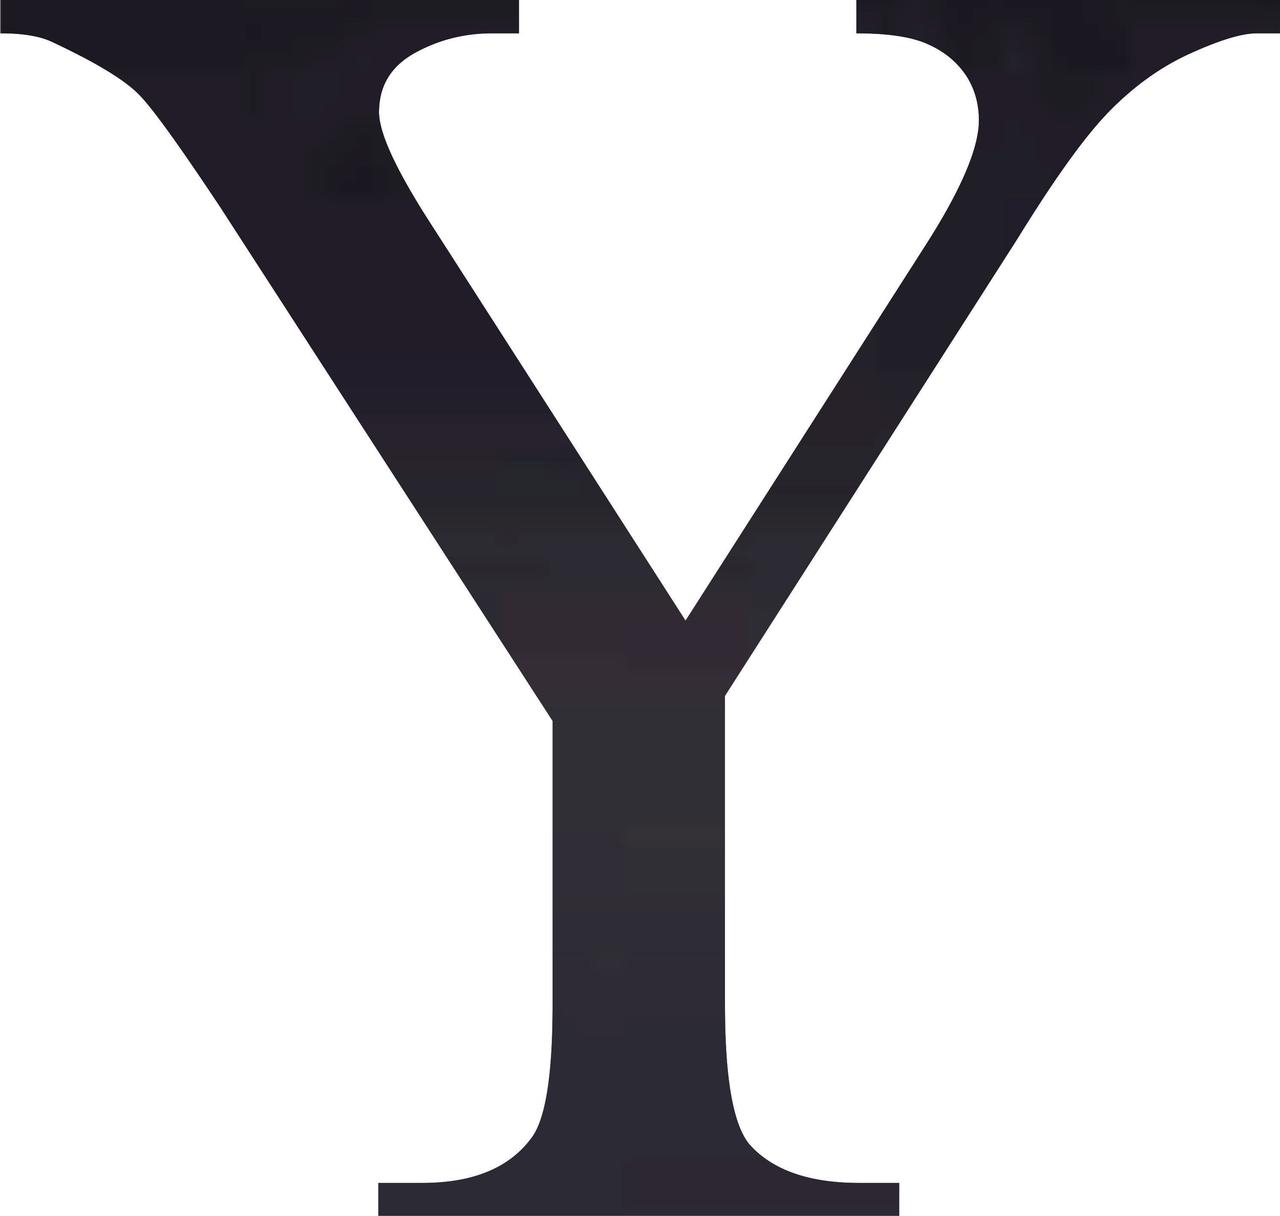 Acrylic Letter Y Times, 6'' Tall Transparent Black Acrylic Alphabet Letters, Choose Color Option - image 1 of 5